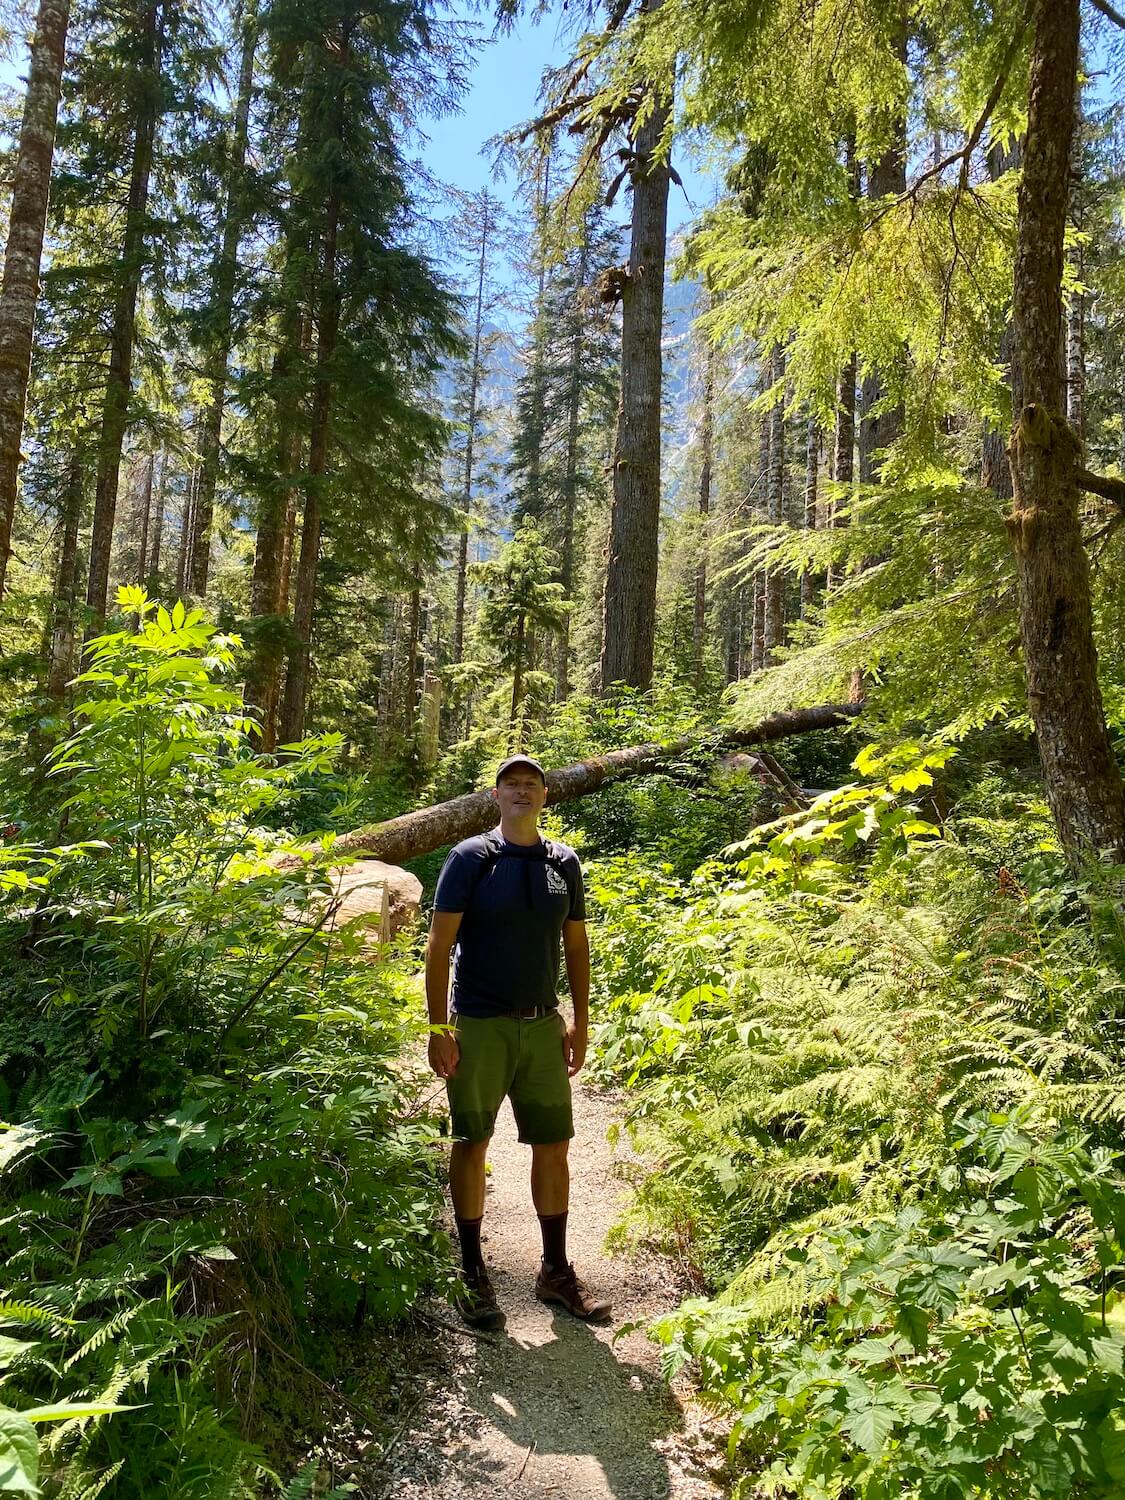 Matthew Kessi poses for a photo in the middle of a rich green forest on the trail to the Big Four Ice Caves in the Mt Baker Snoqualmie National Forest. He's wearing green shorts and a blue t-shirt and a black cap and there are many varieties of shrubs and trees around him with patches of blue sky peeking from above.